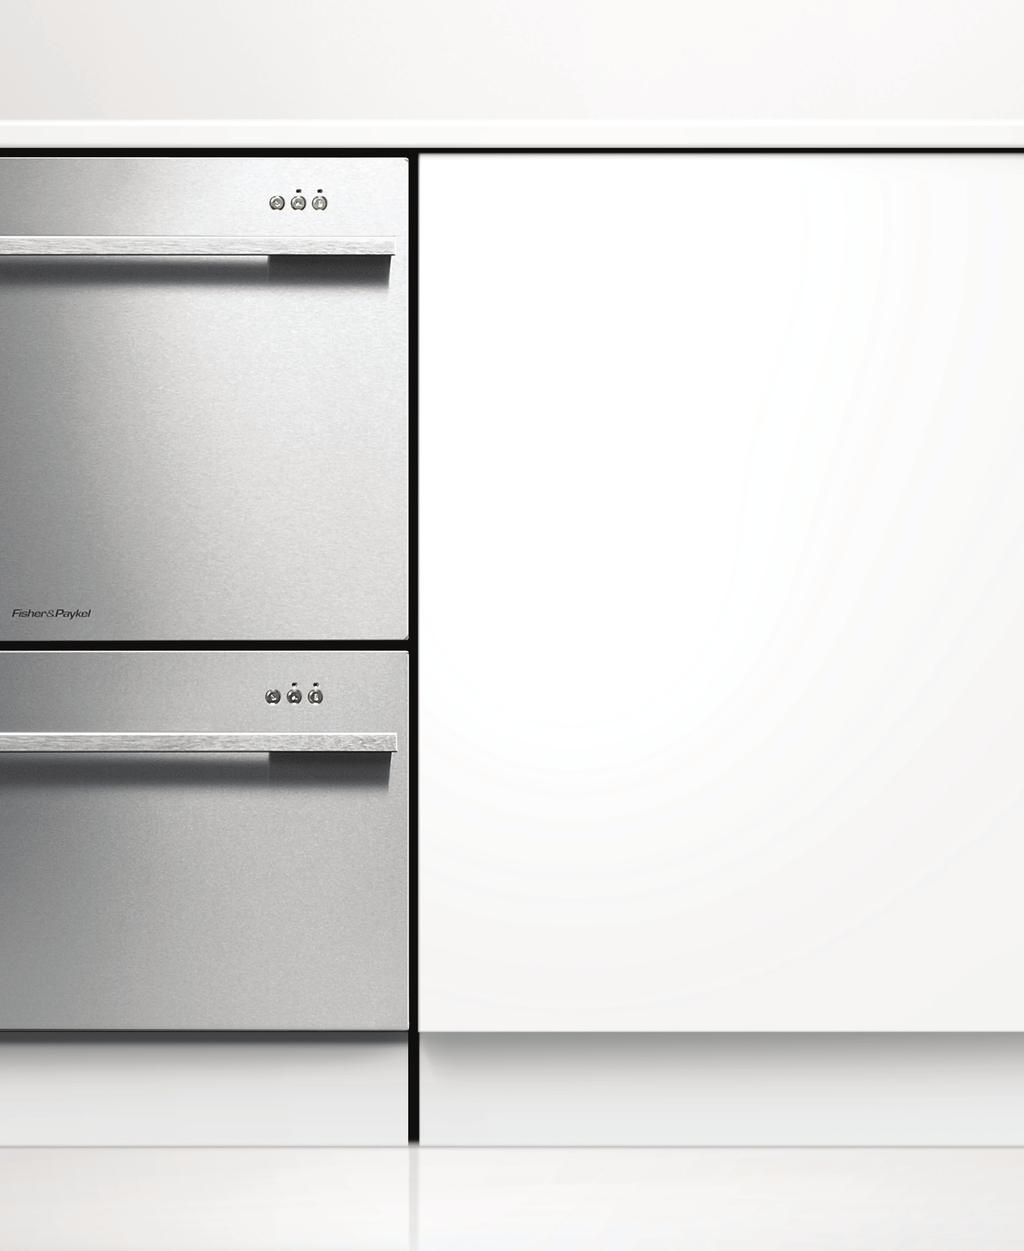 DishDrawer Key features We created the DishDrawer dishwasher over a decade ago and revolutionized the way we cleaned our dishes.